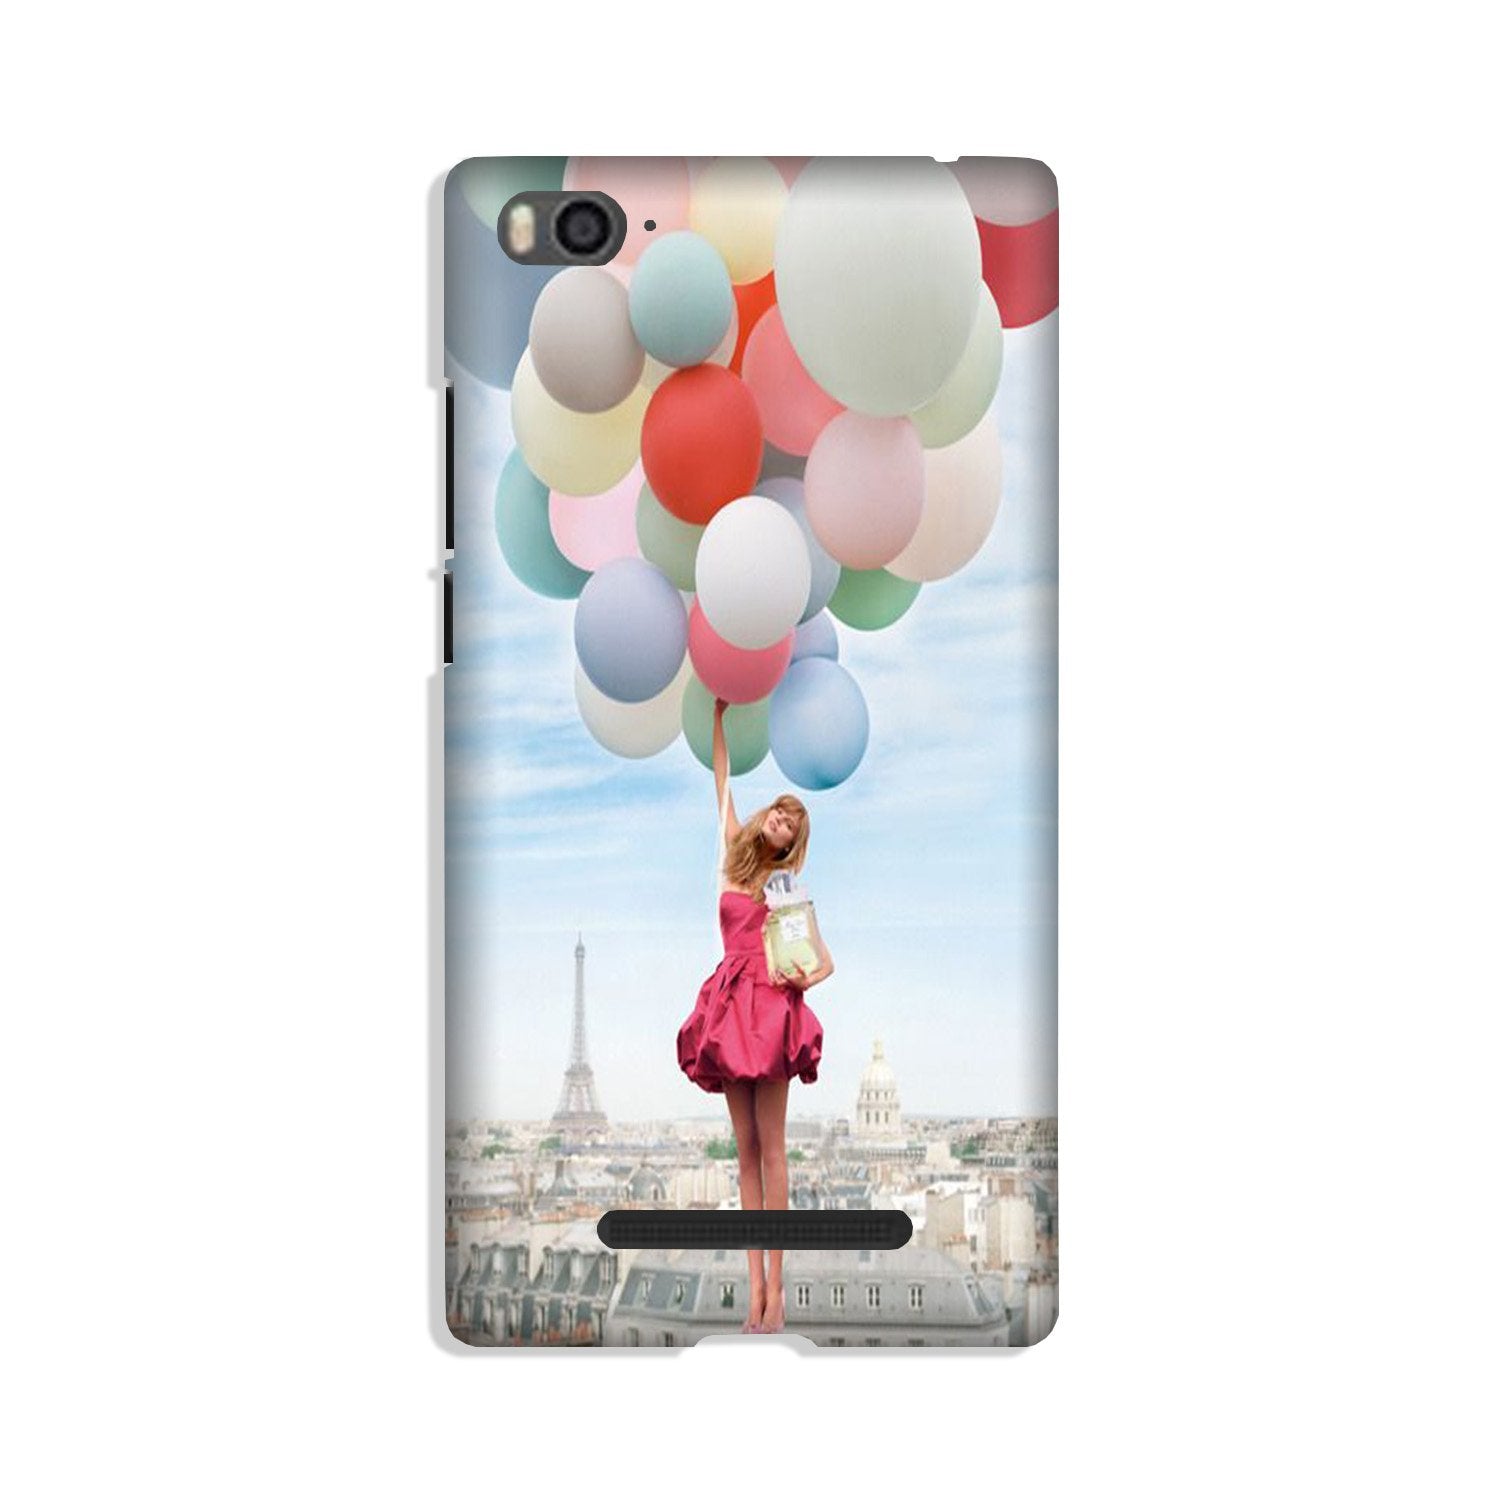 Girl with Baloon Case for Xiaomi Mi 4i